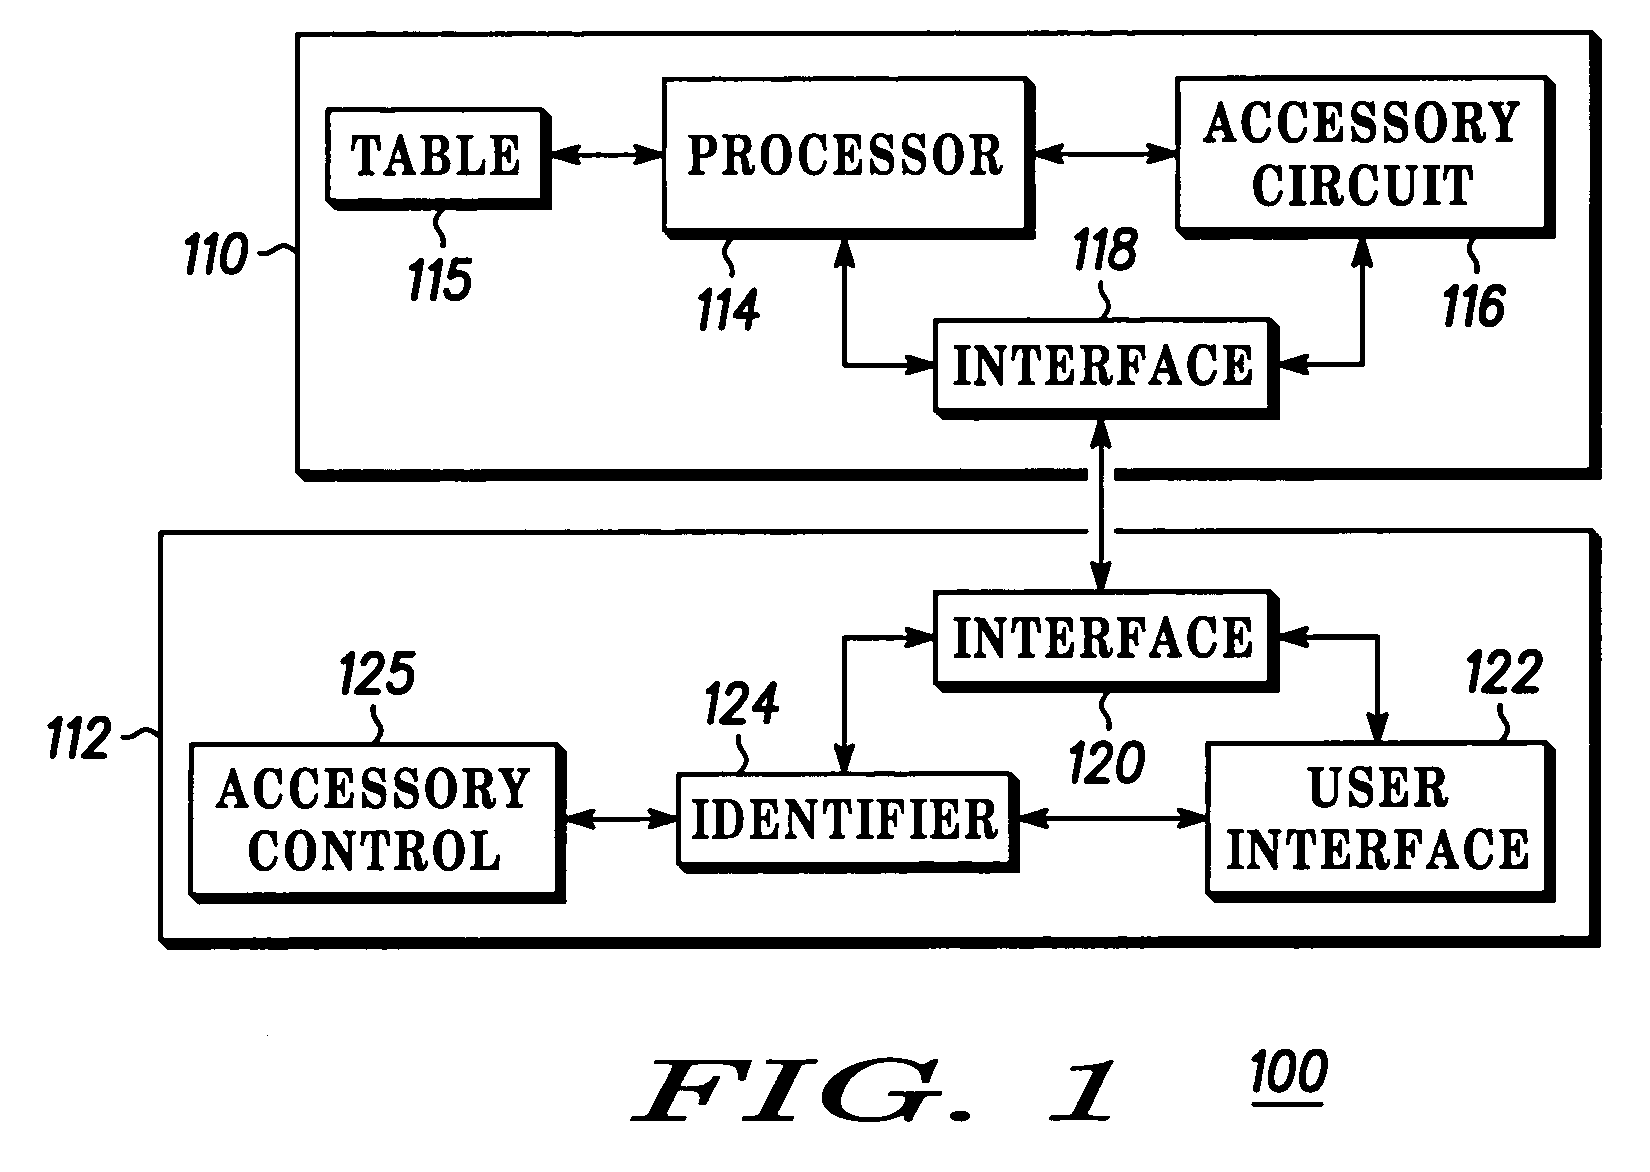 Method and system for operating accessory controls